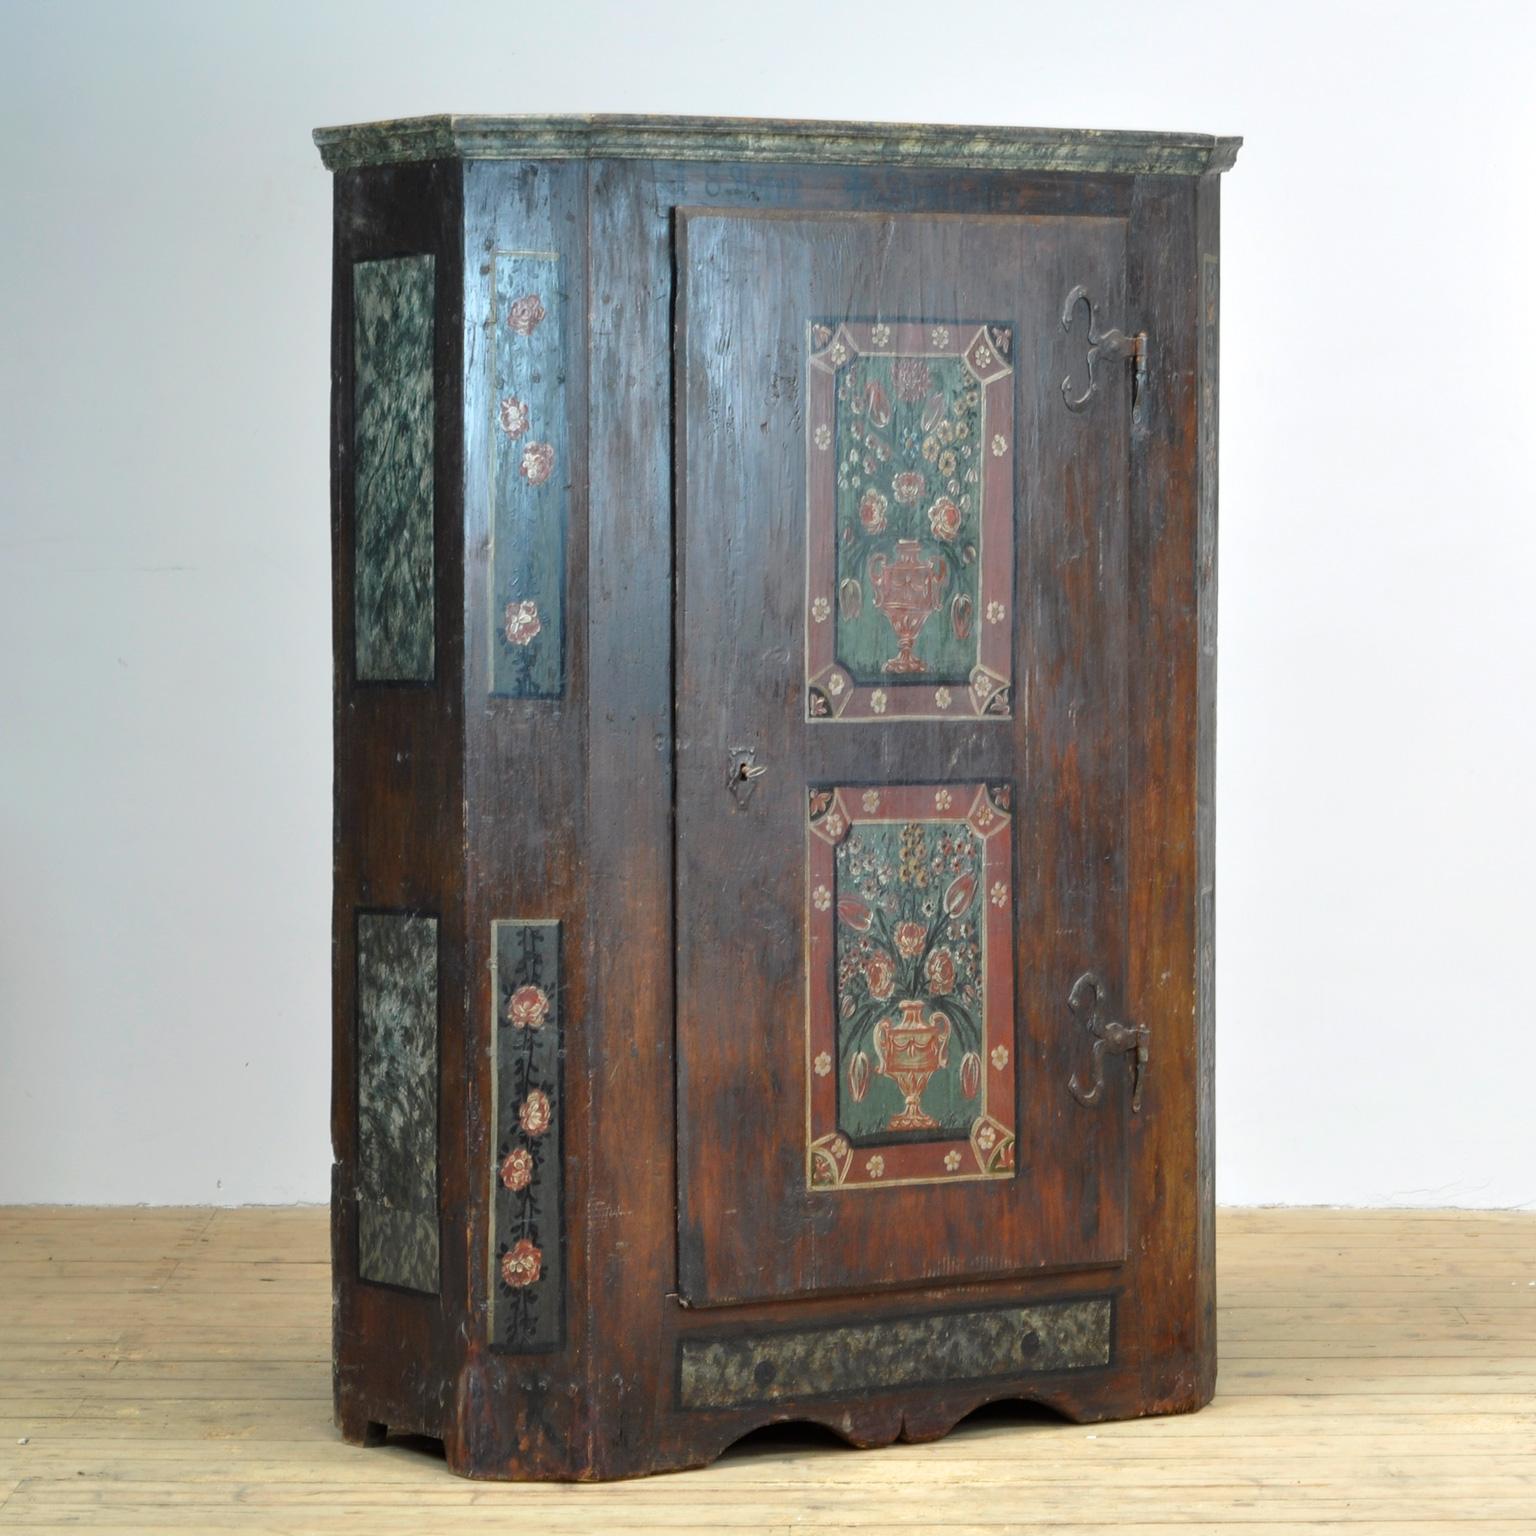 Rustic German Hand Painted Cabinet from 1812